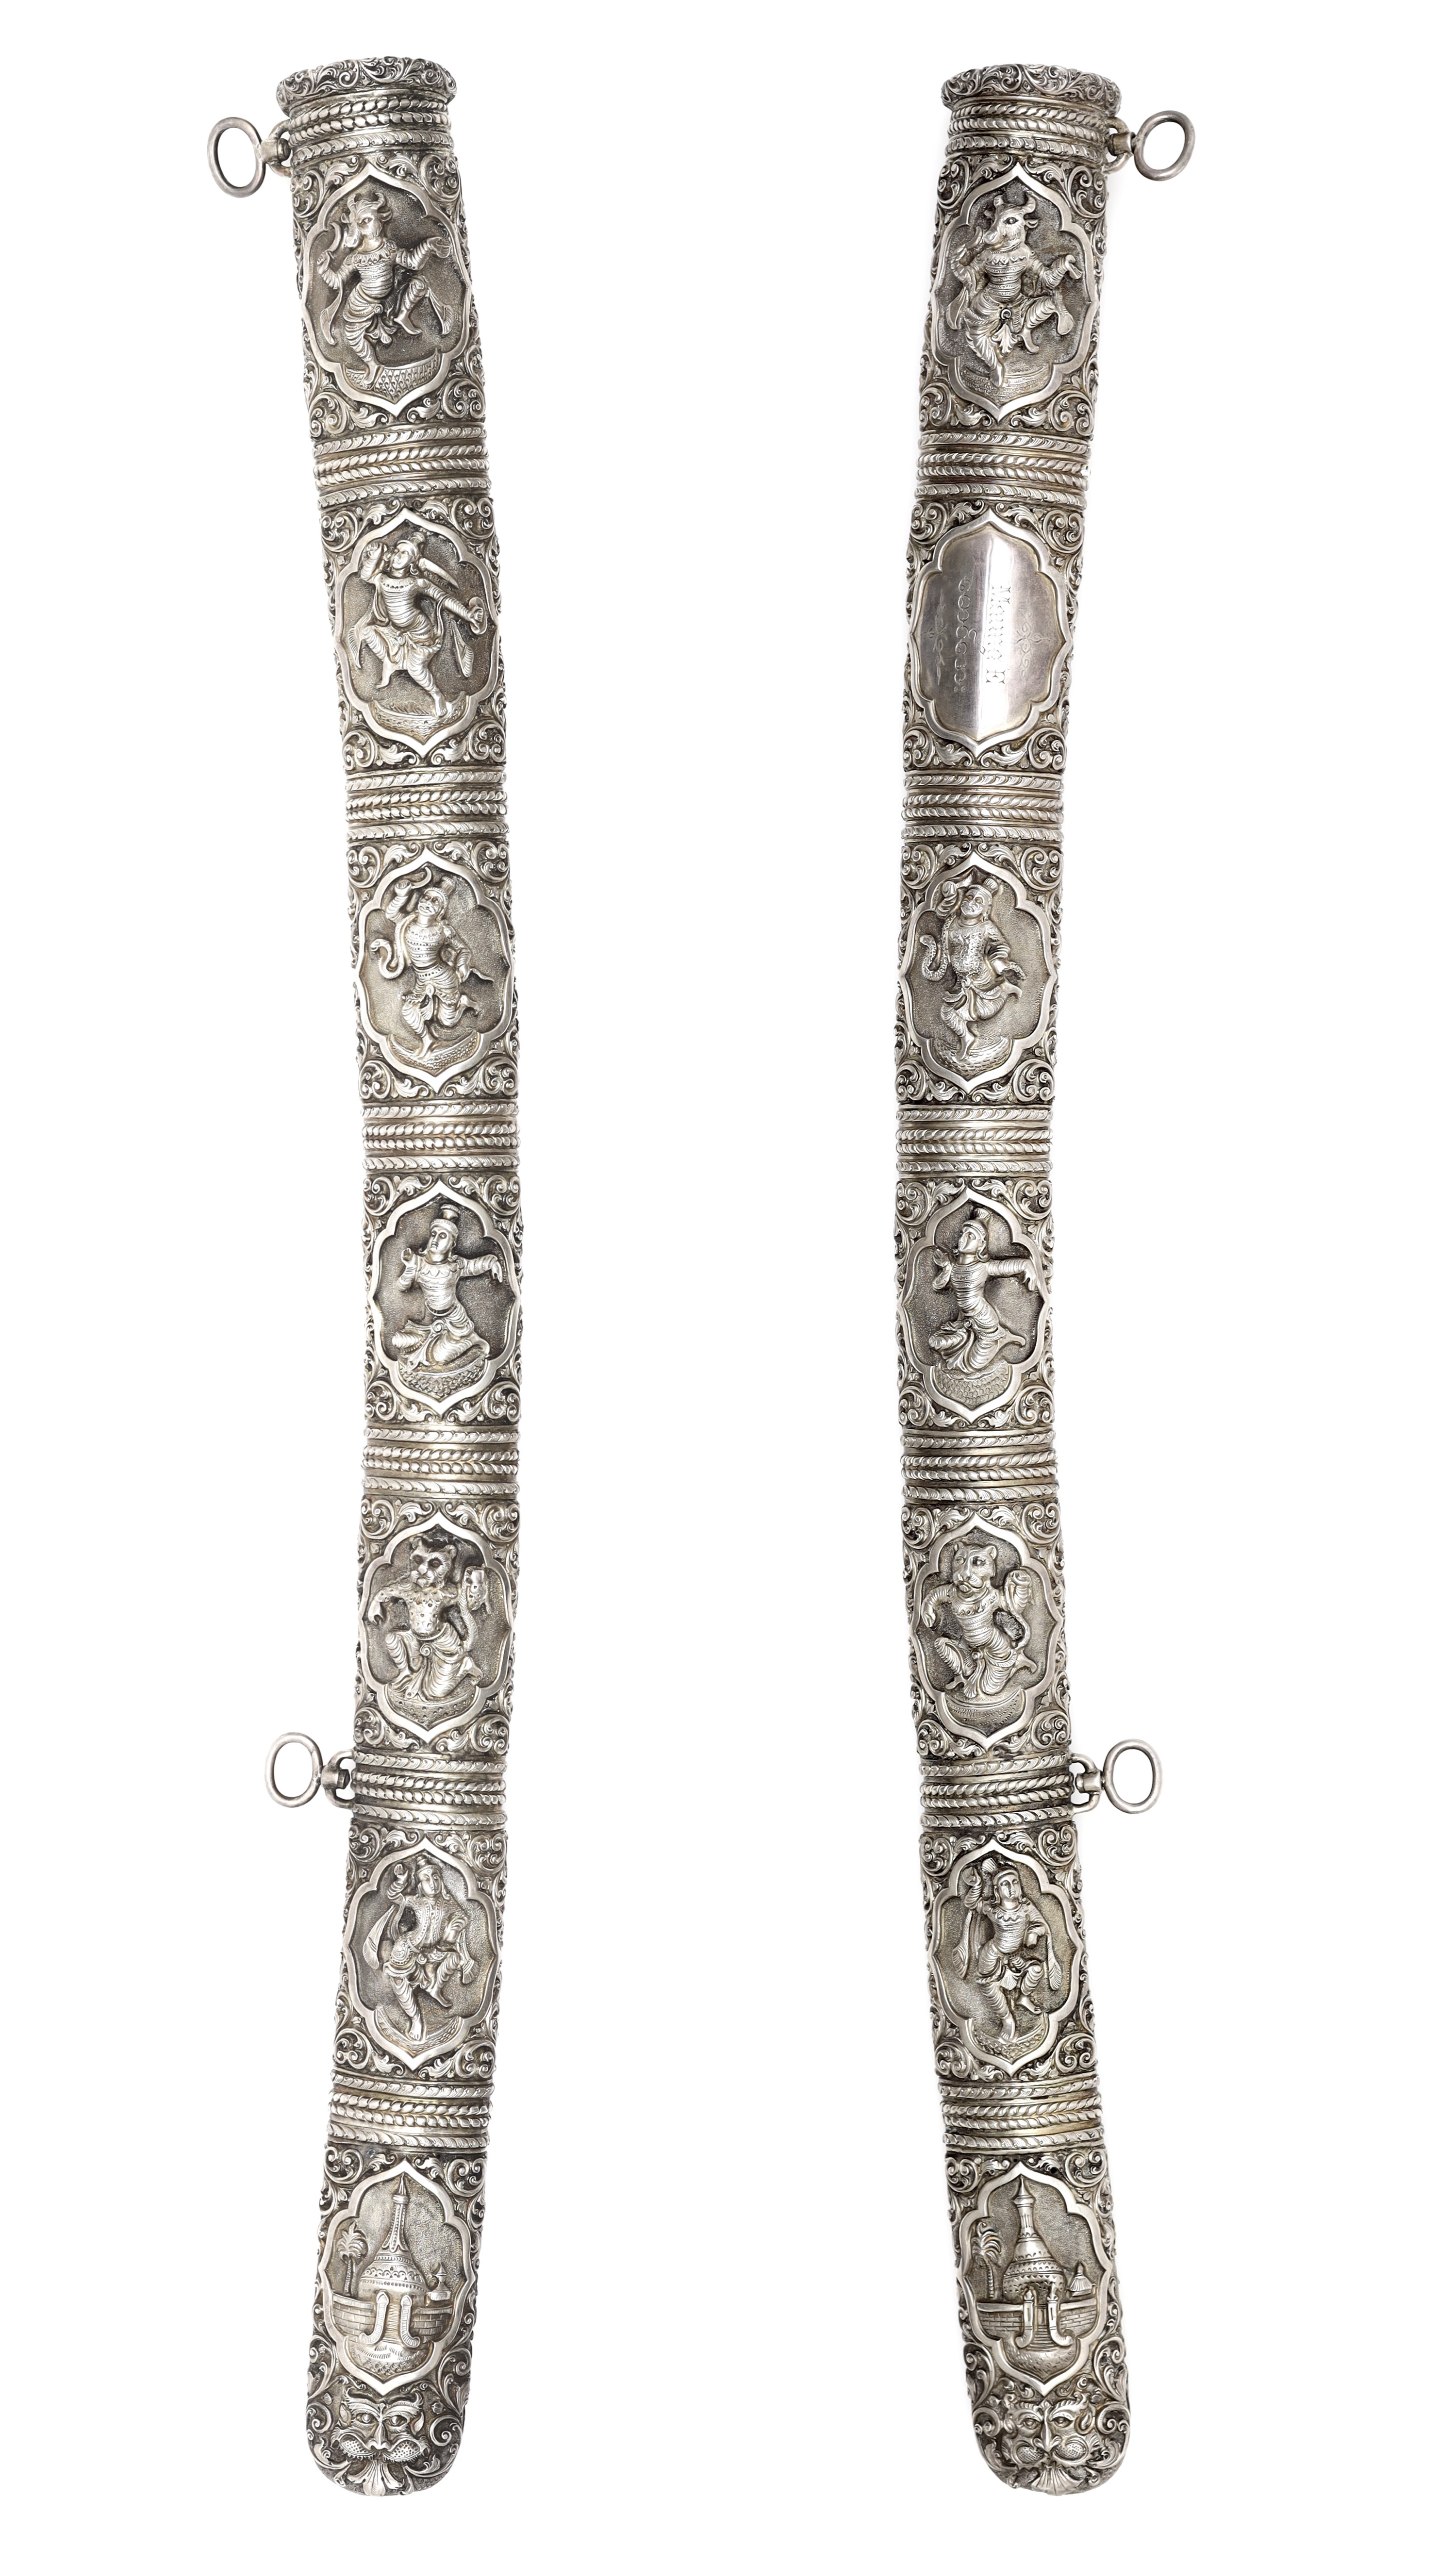 Scabbards overall